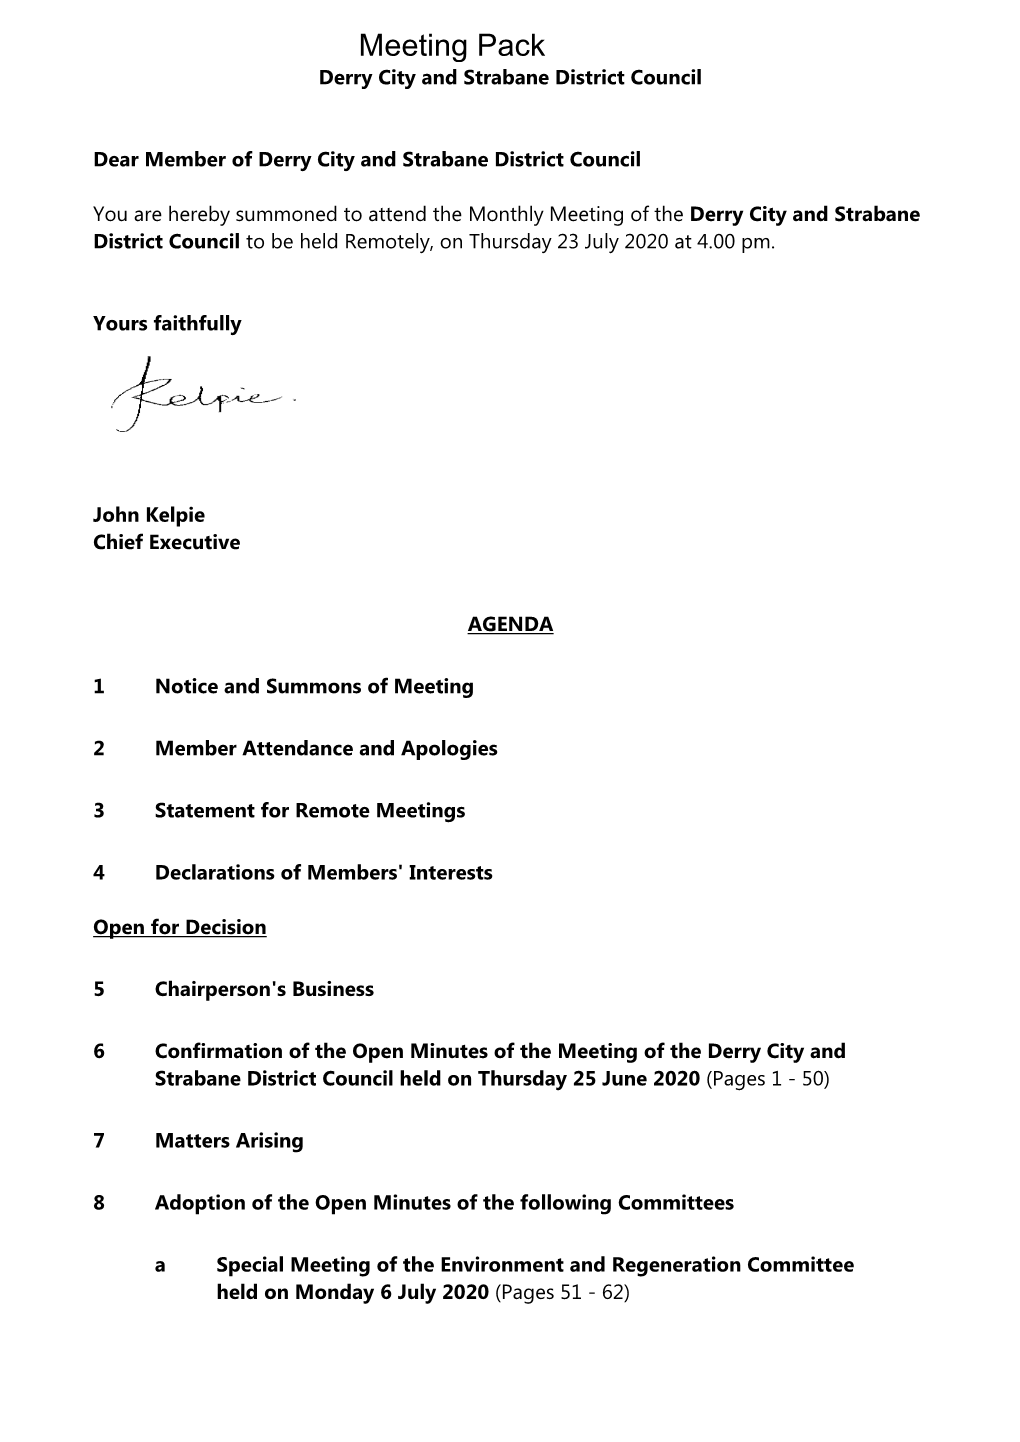 (Public Pack)Agenda Document for Derry City and Strabane District